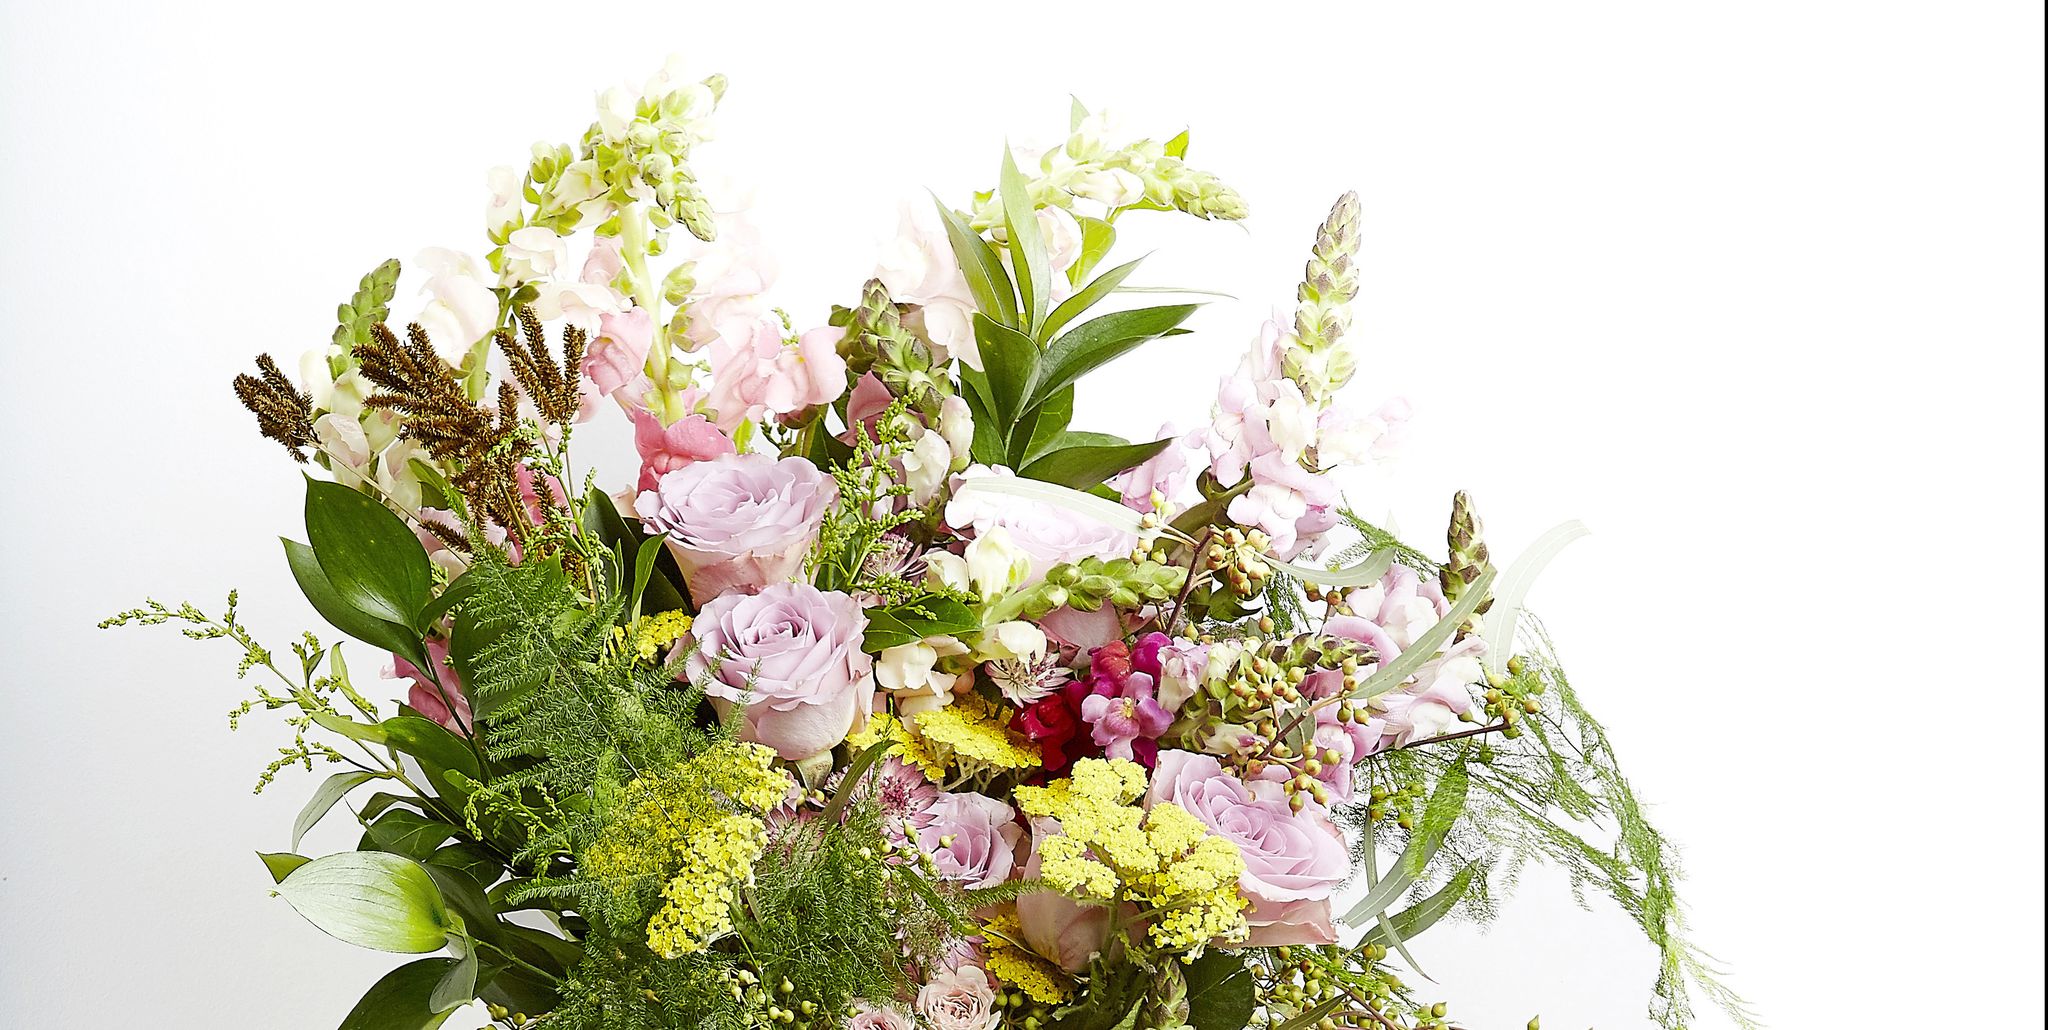 Hayfever-friendly flower bouquet - Grace & Thorn - Funnyhowflowersdothat.co.uk - Flower Council of Holland